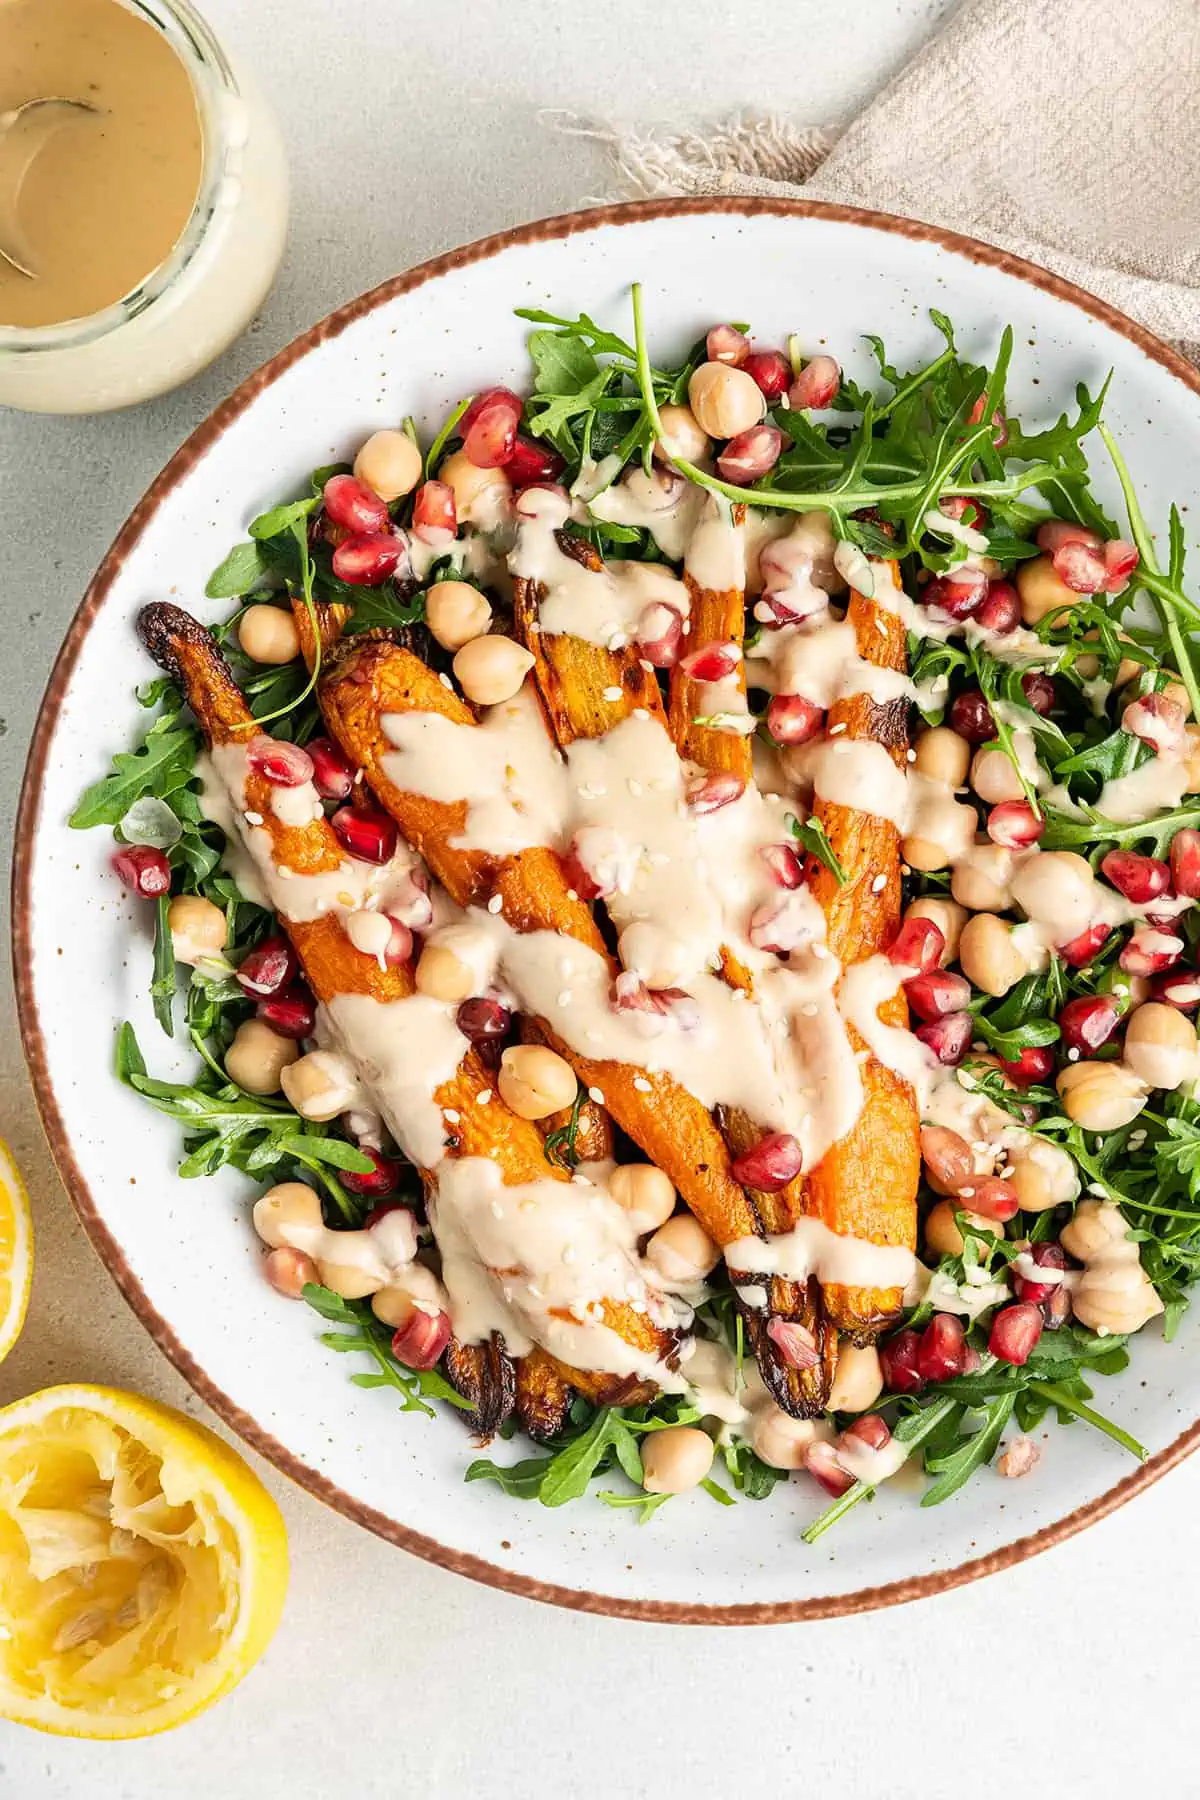 Overhead view of a salad with arugula, chickpeas, pomegranate seeds, and roasted carrots, with tahini dressing on top